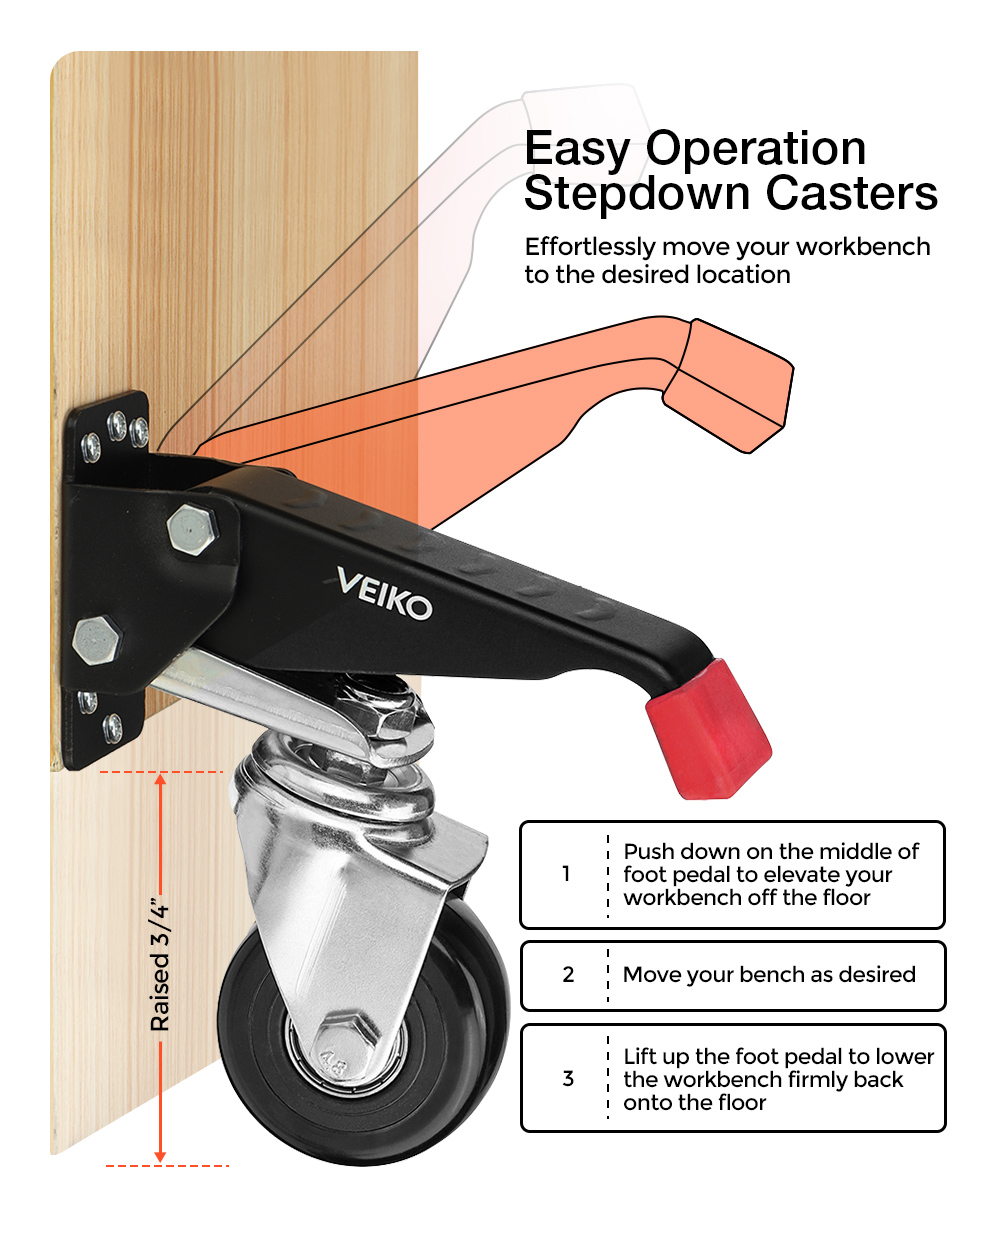 VEIKO-4PCS-Quick-Change-Workbench-Casters-Kit-Heavy-Duty-Retractable-Workbench-Casters-Wheels-660Lbs-1897937-5